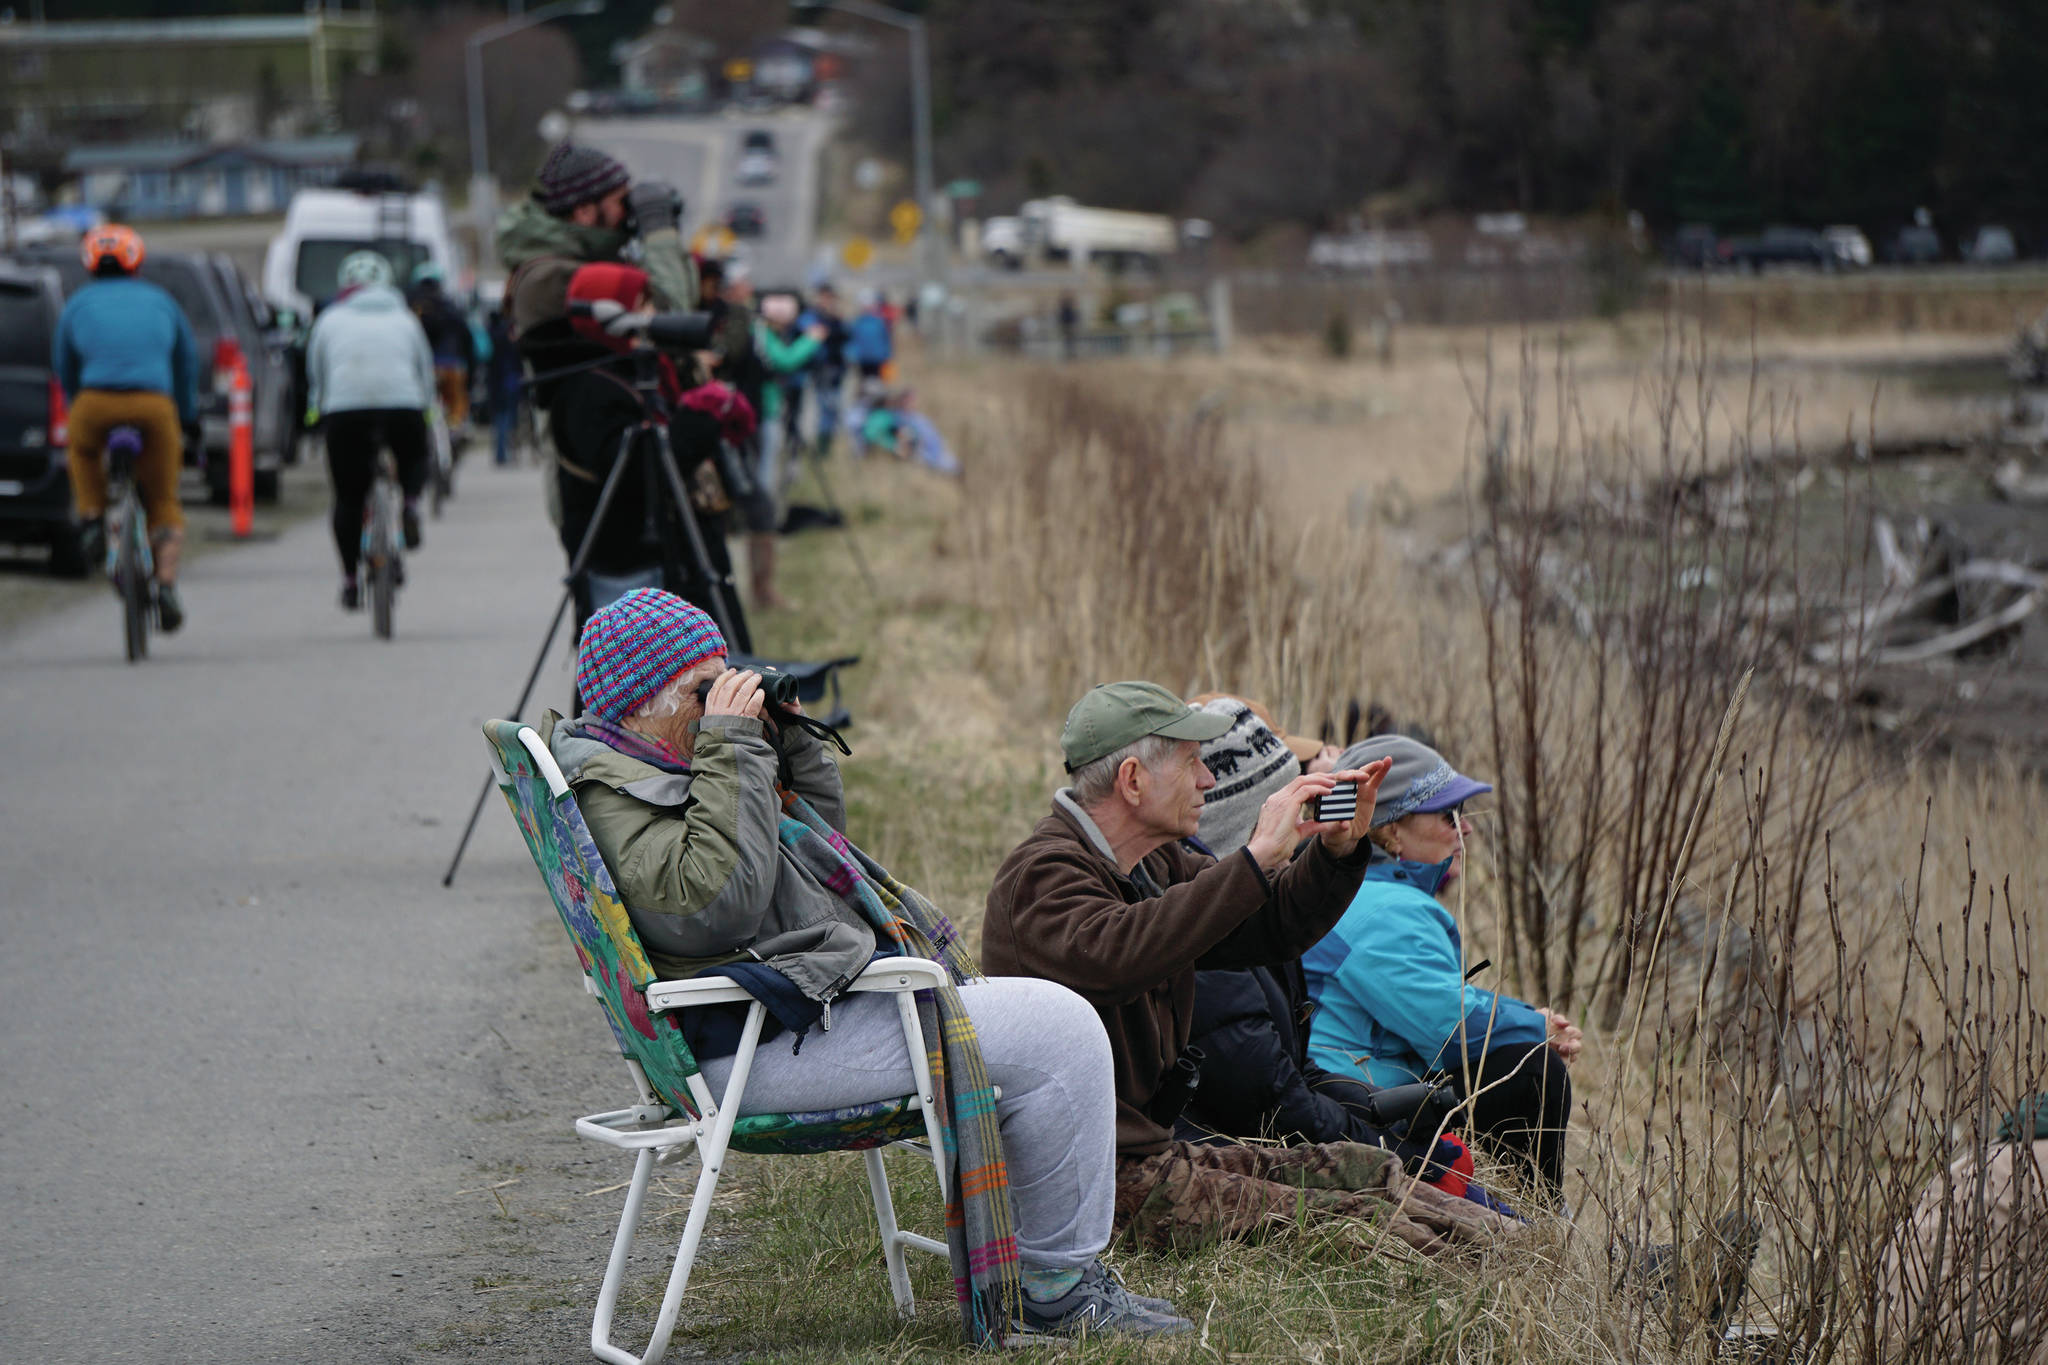 Birders check out shorebirds on the outgoing tide on Saturday, May 8, 2021, at Mud Bay on the Homer Spit in Homer, Alaska. (Photo by Michael Armstrong/Homer News)